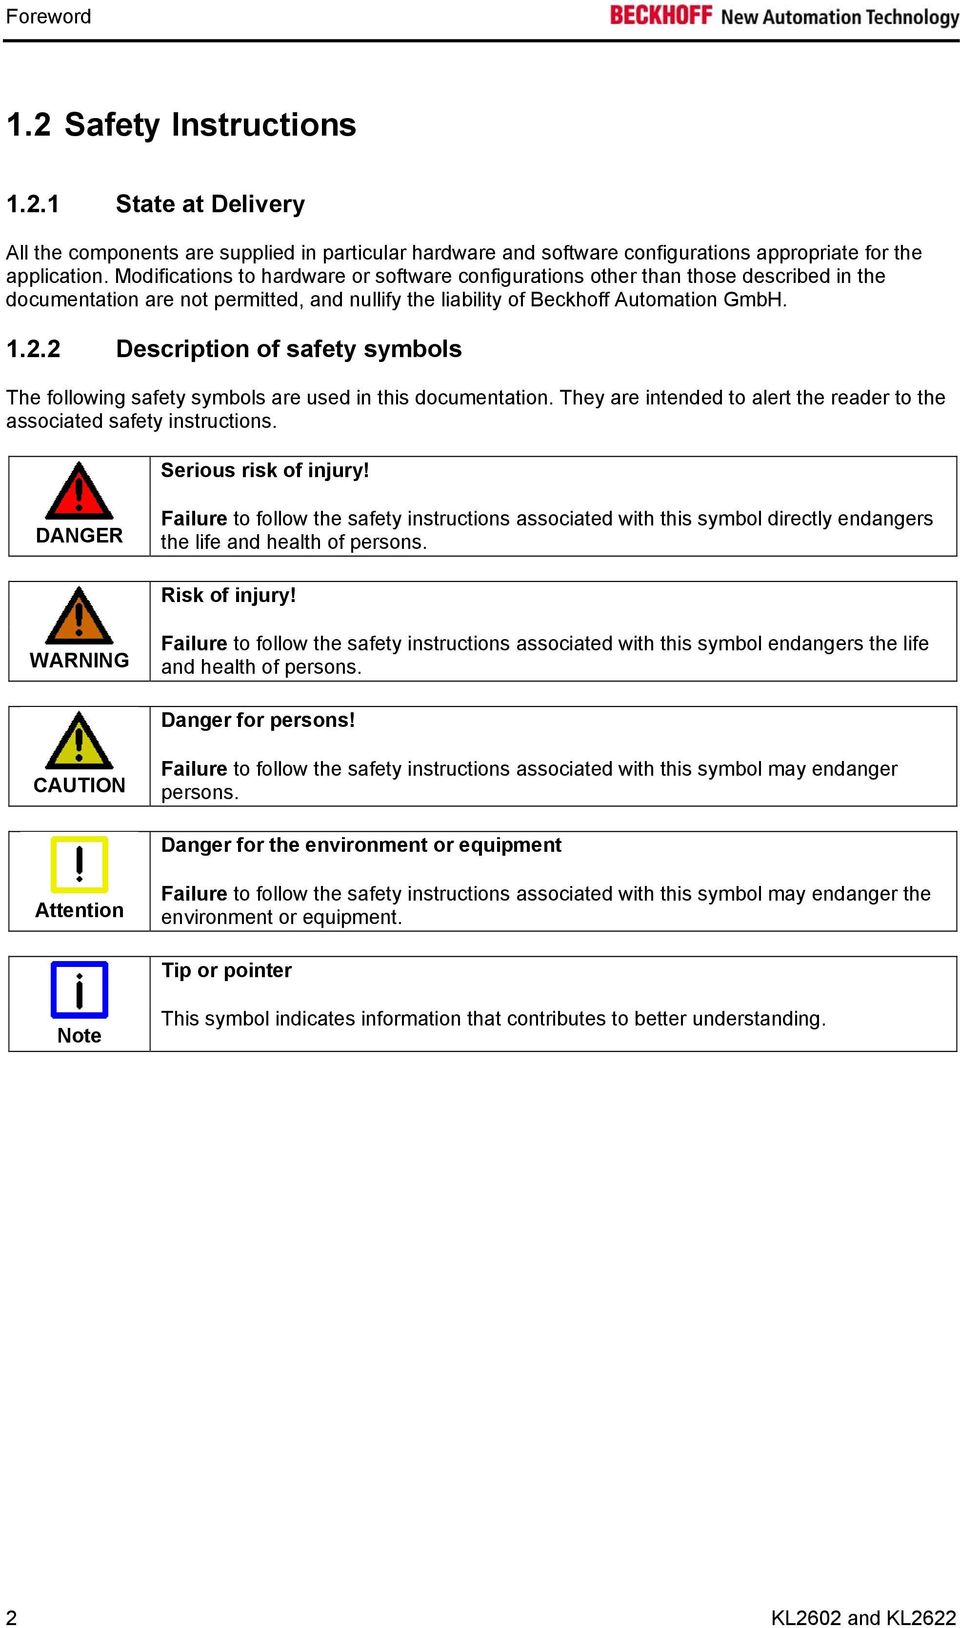 2 Description of safety symbols The following safety symbols are used in this documentation. They are intended to alert the reader to the associated safety instructions. Serious risk of injury!